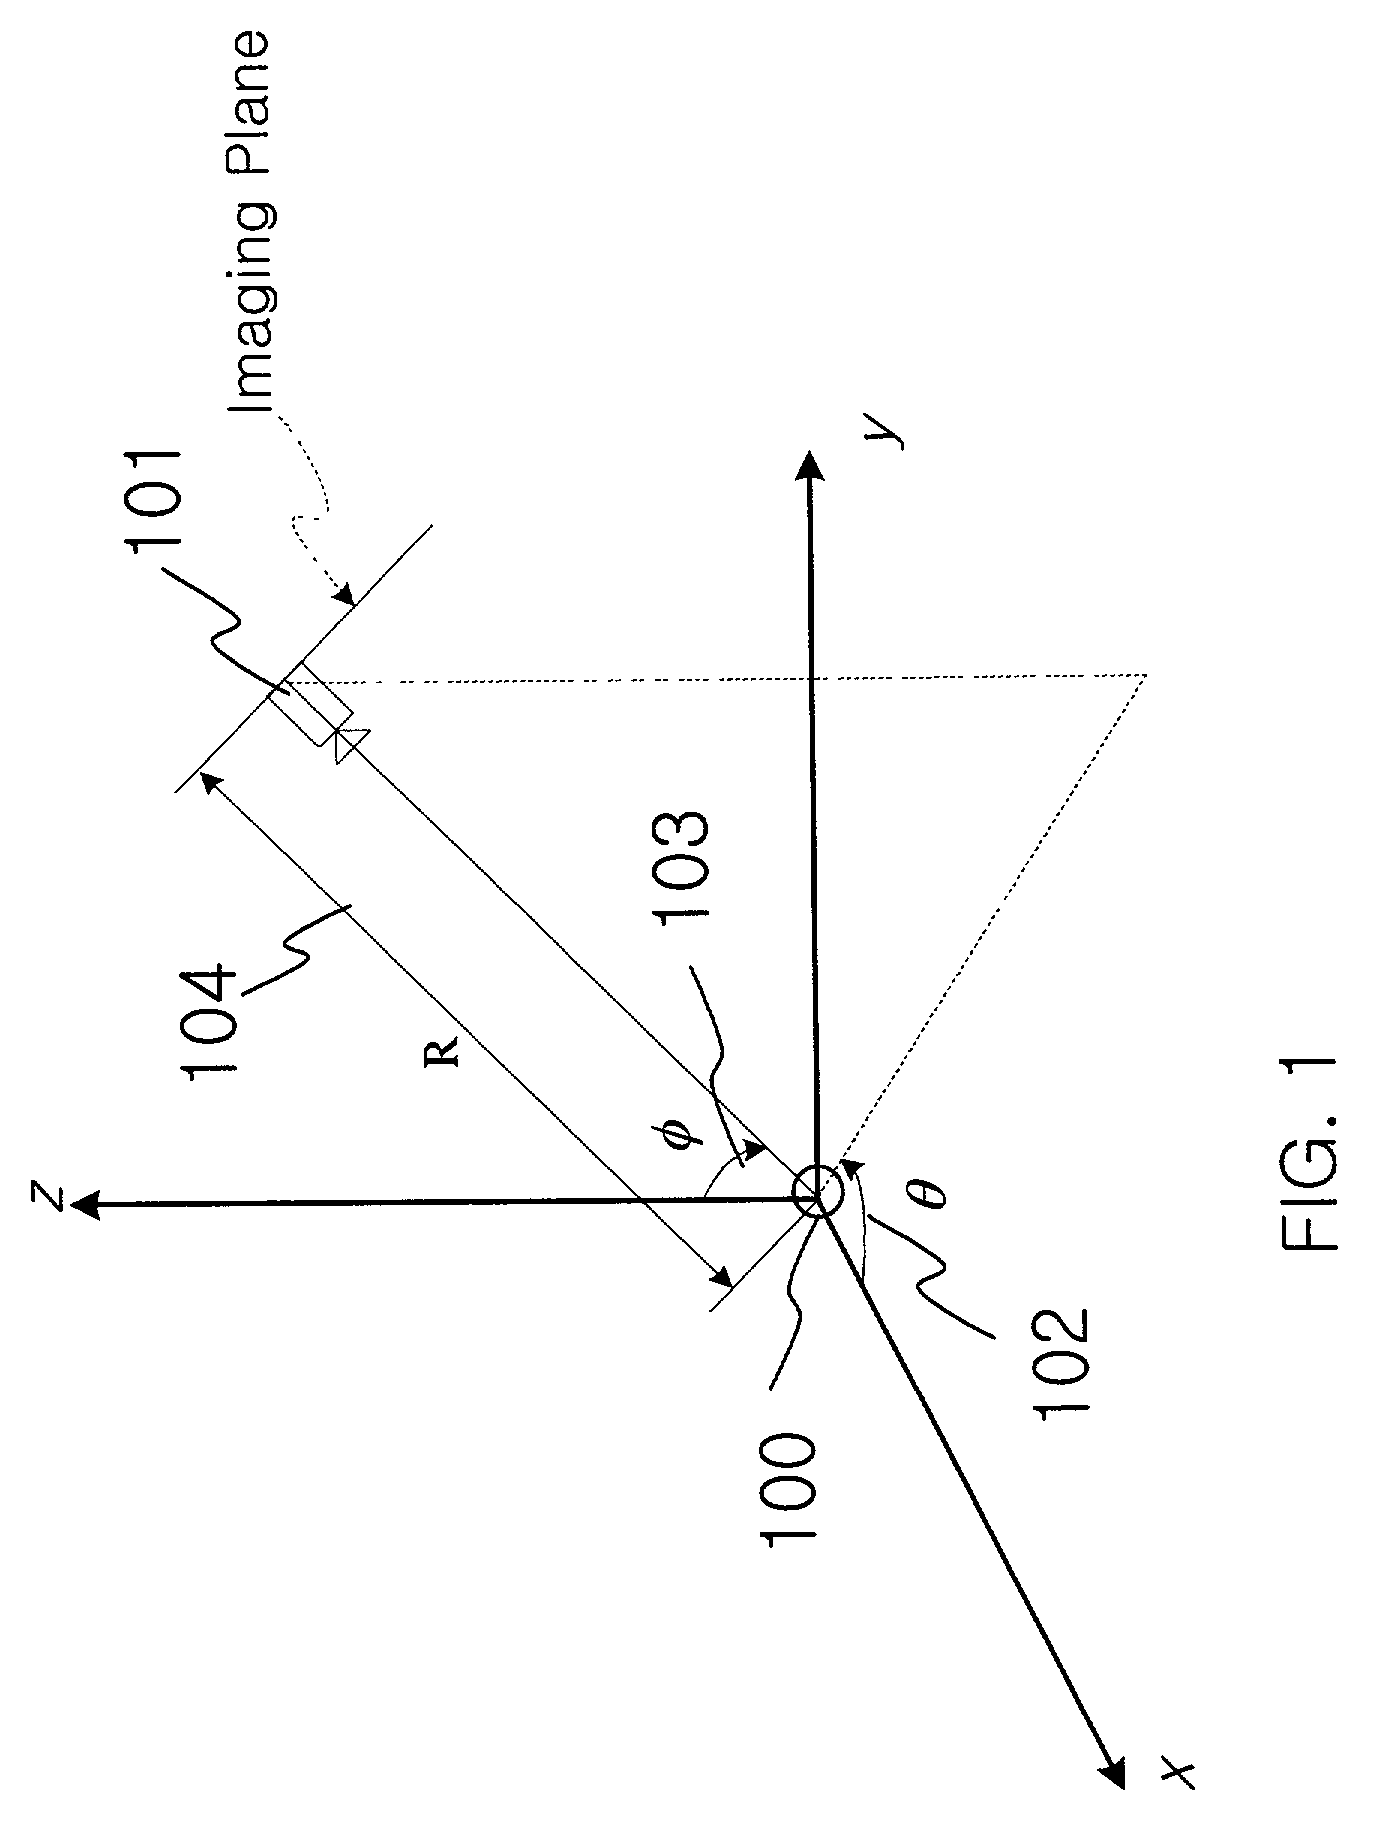 Method and apparatus for visualization and manipulation of real 3-D objects in networked environments